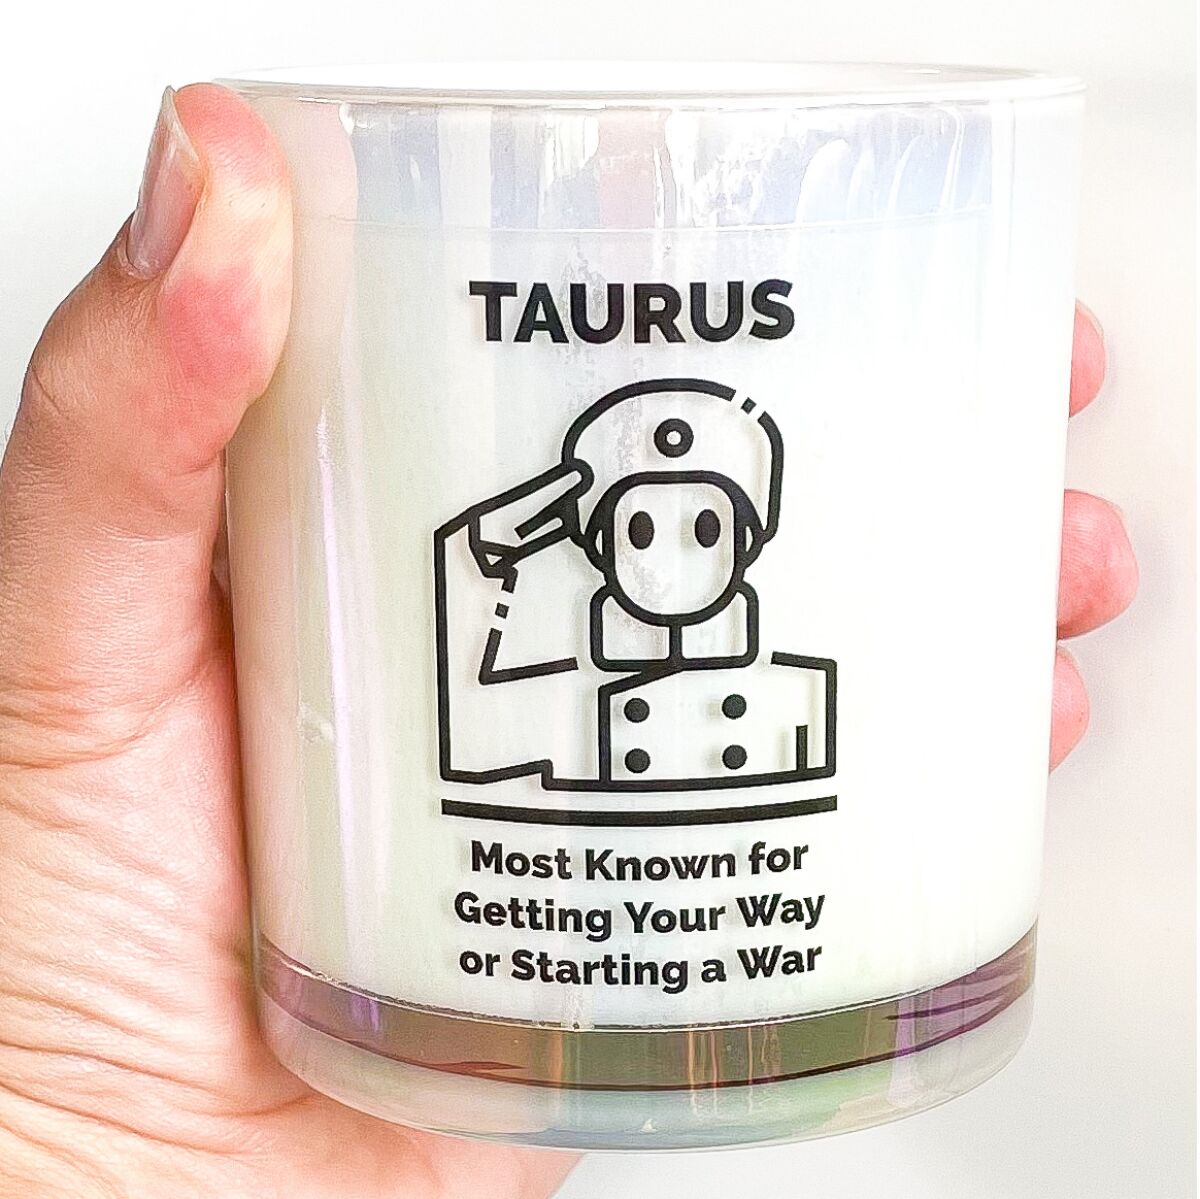 A candle that says "Taurus: Most Known for Getting Your Way or Starting a War"